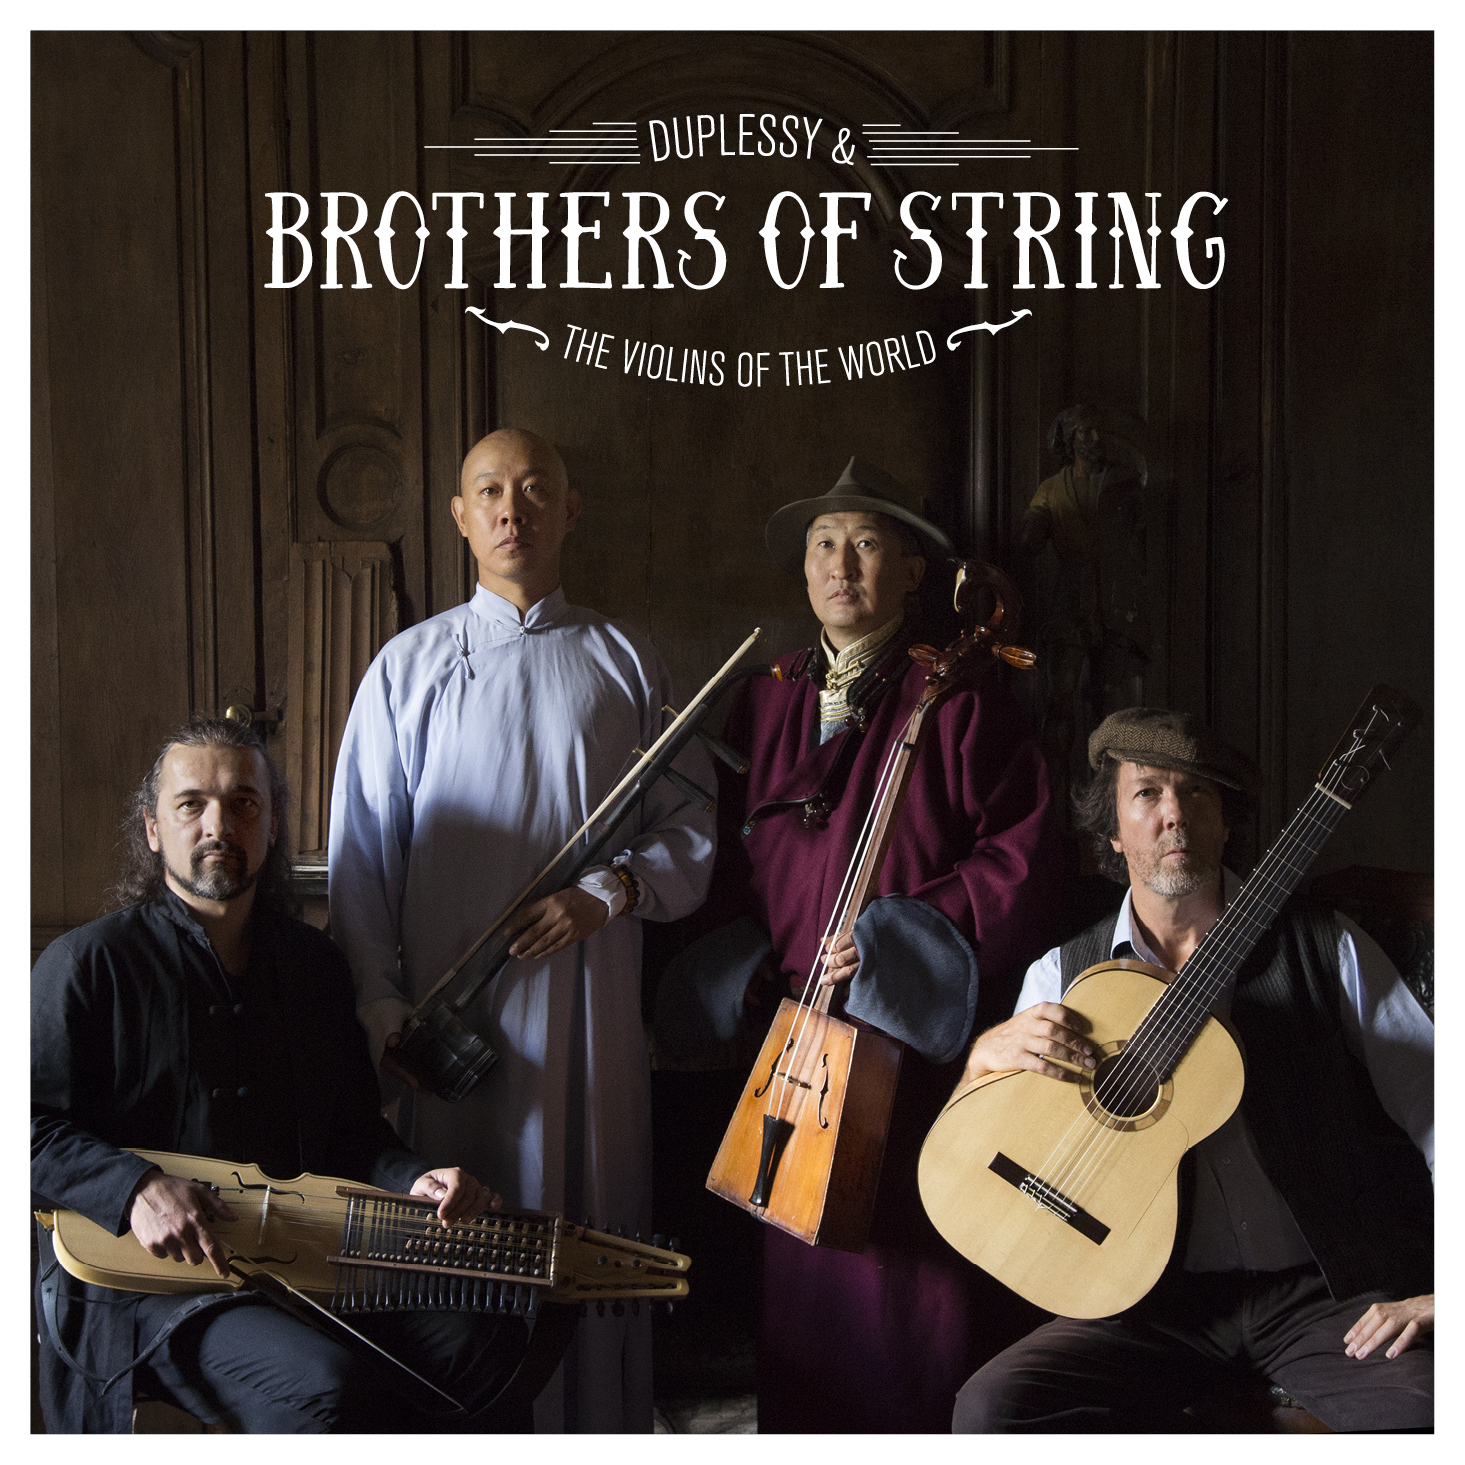 Duplessy et the Violins of The World annoncent l'album Brothers of String